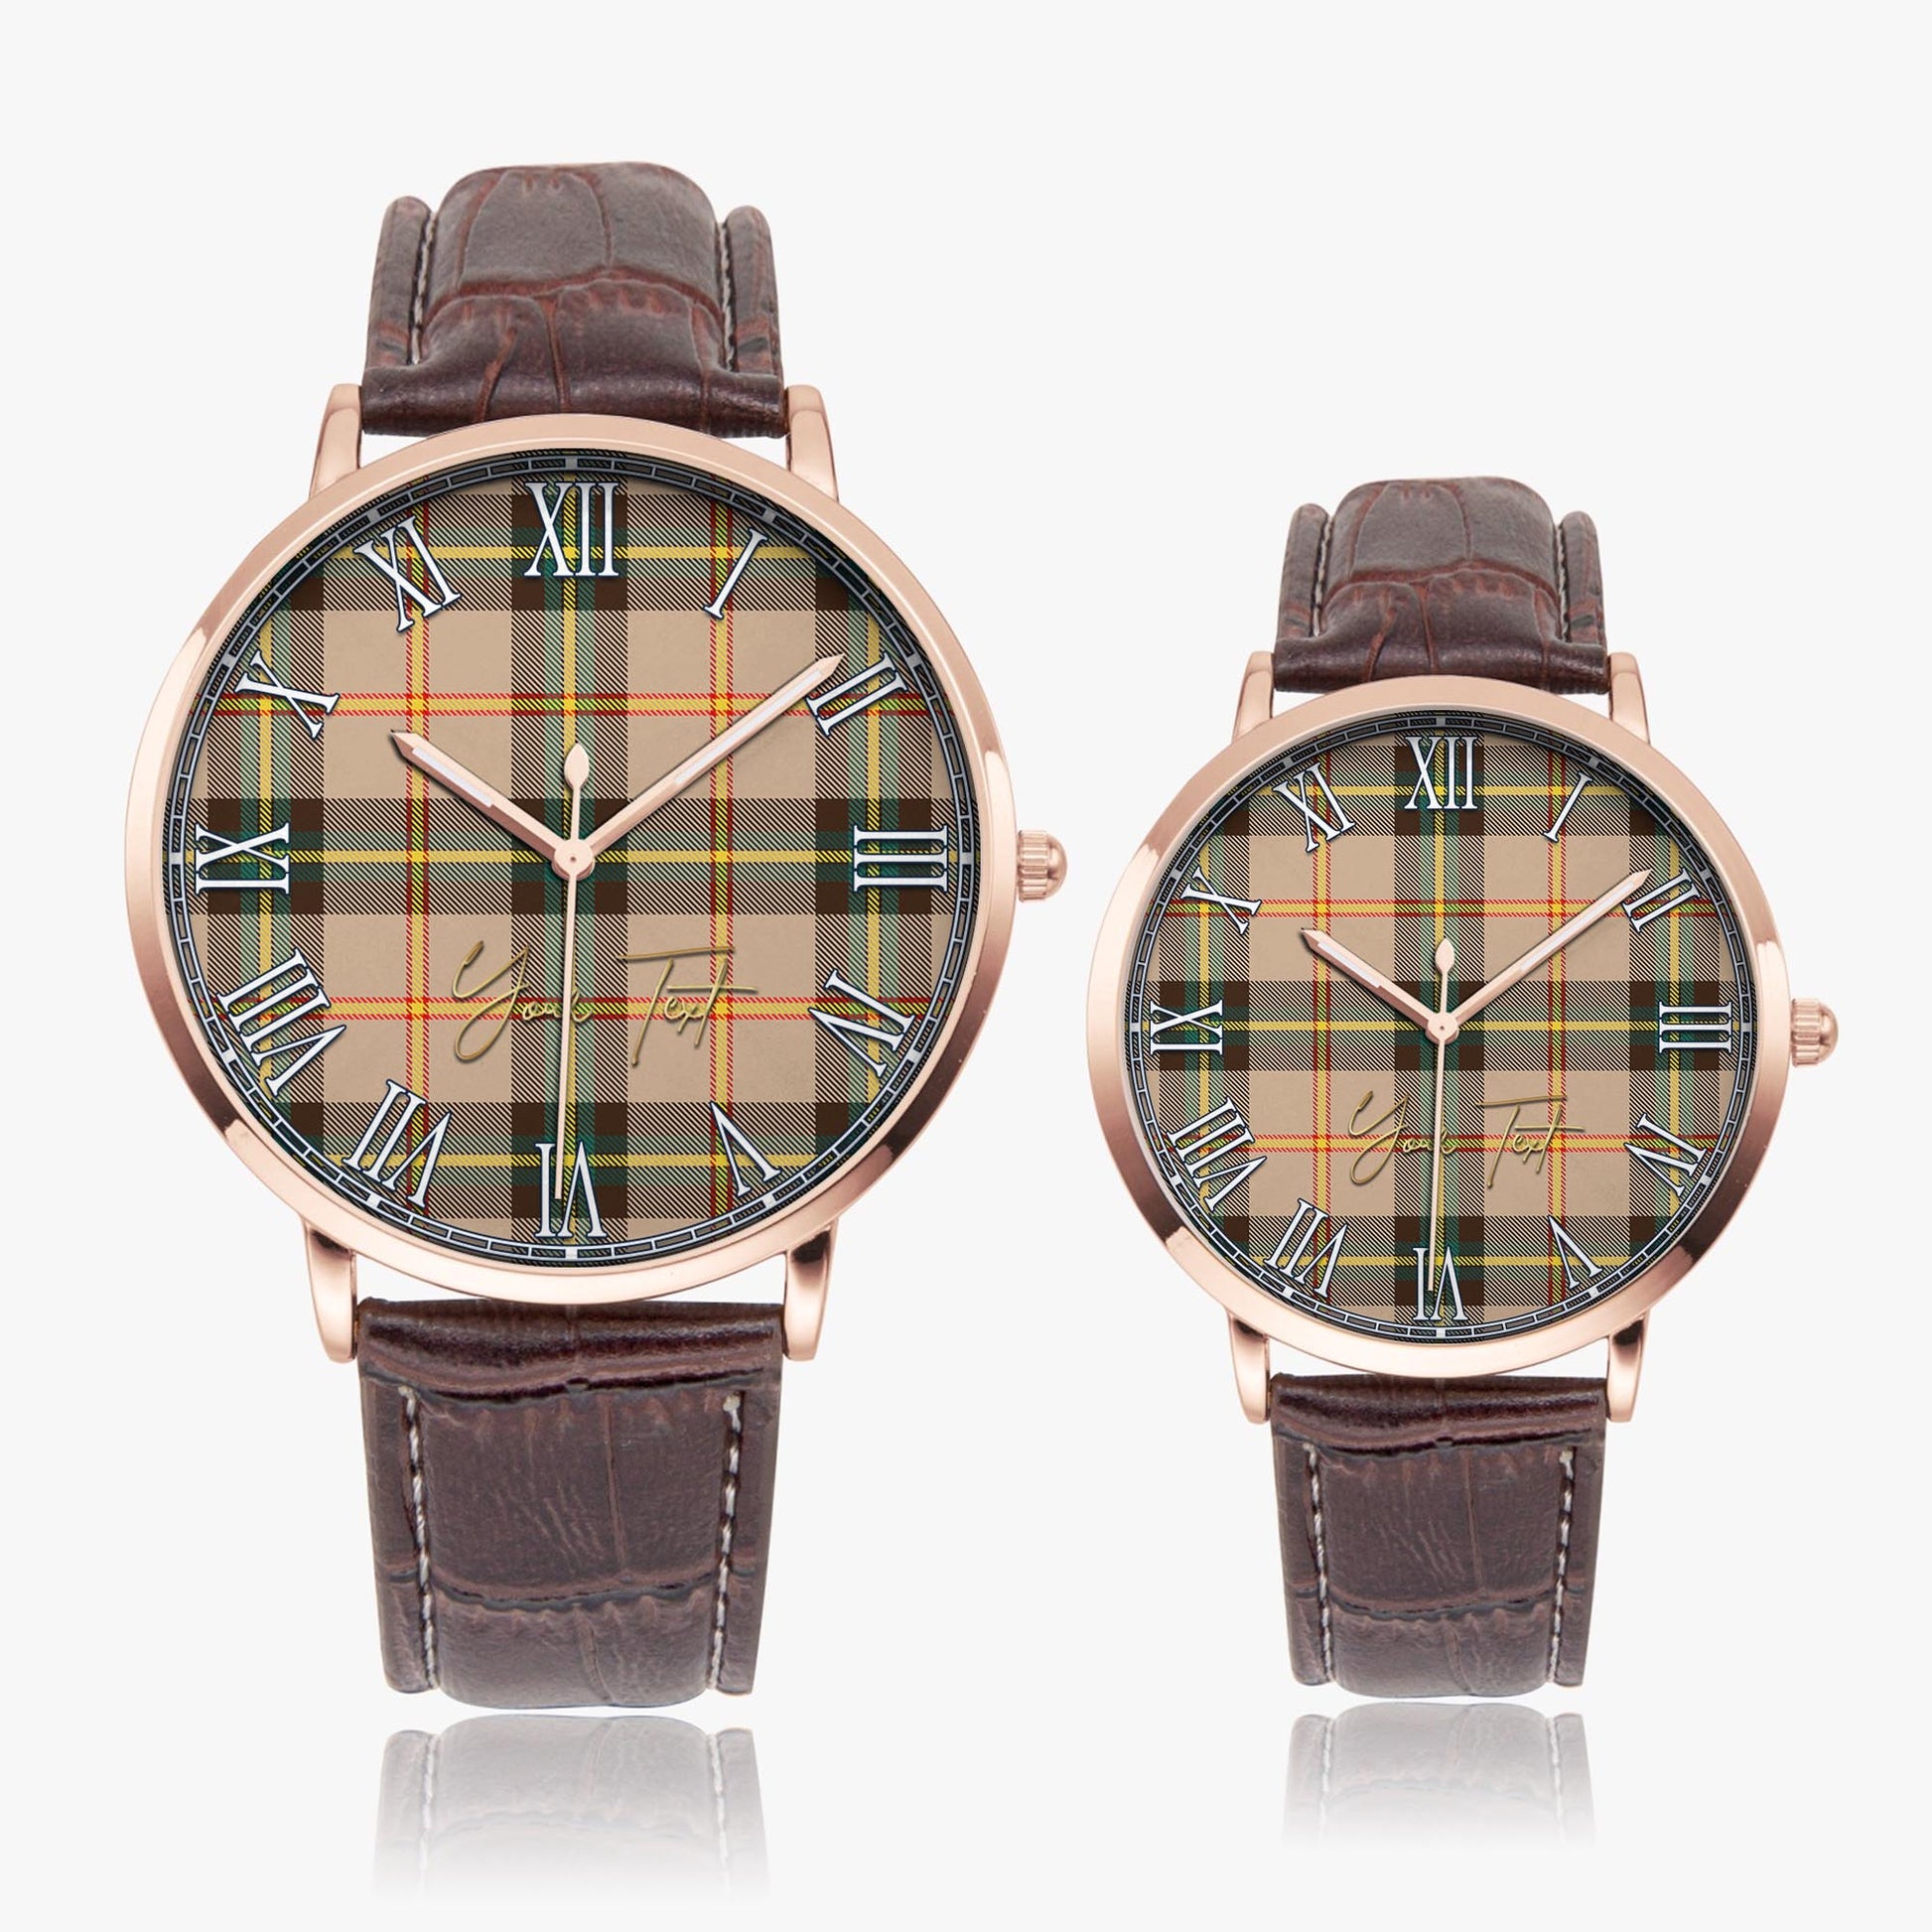 Saskatchewan Province Canada Tartan Personalized Your Text Leather Trap Quartz Watch Ultra Thin Rose Gold Case With Brown Leather Strap - Tartanvibesclothing